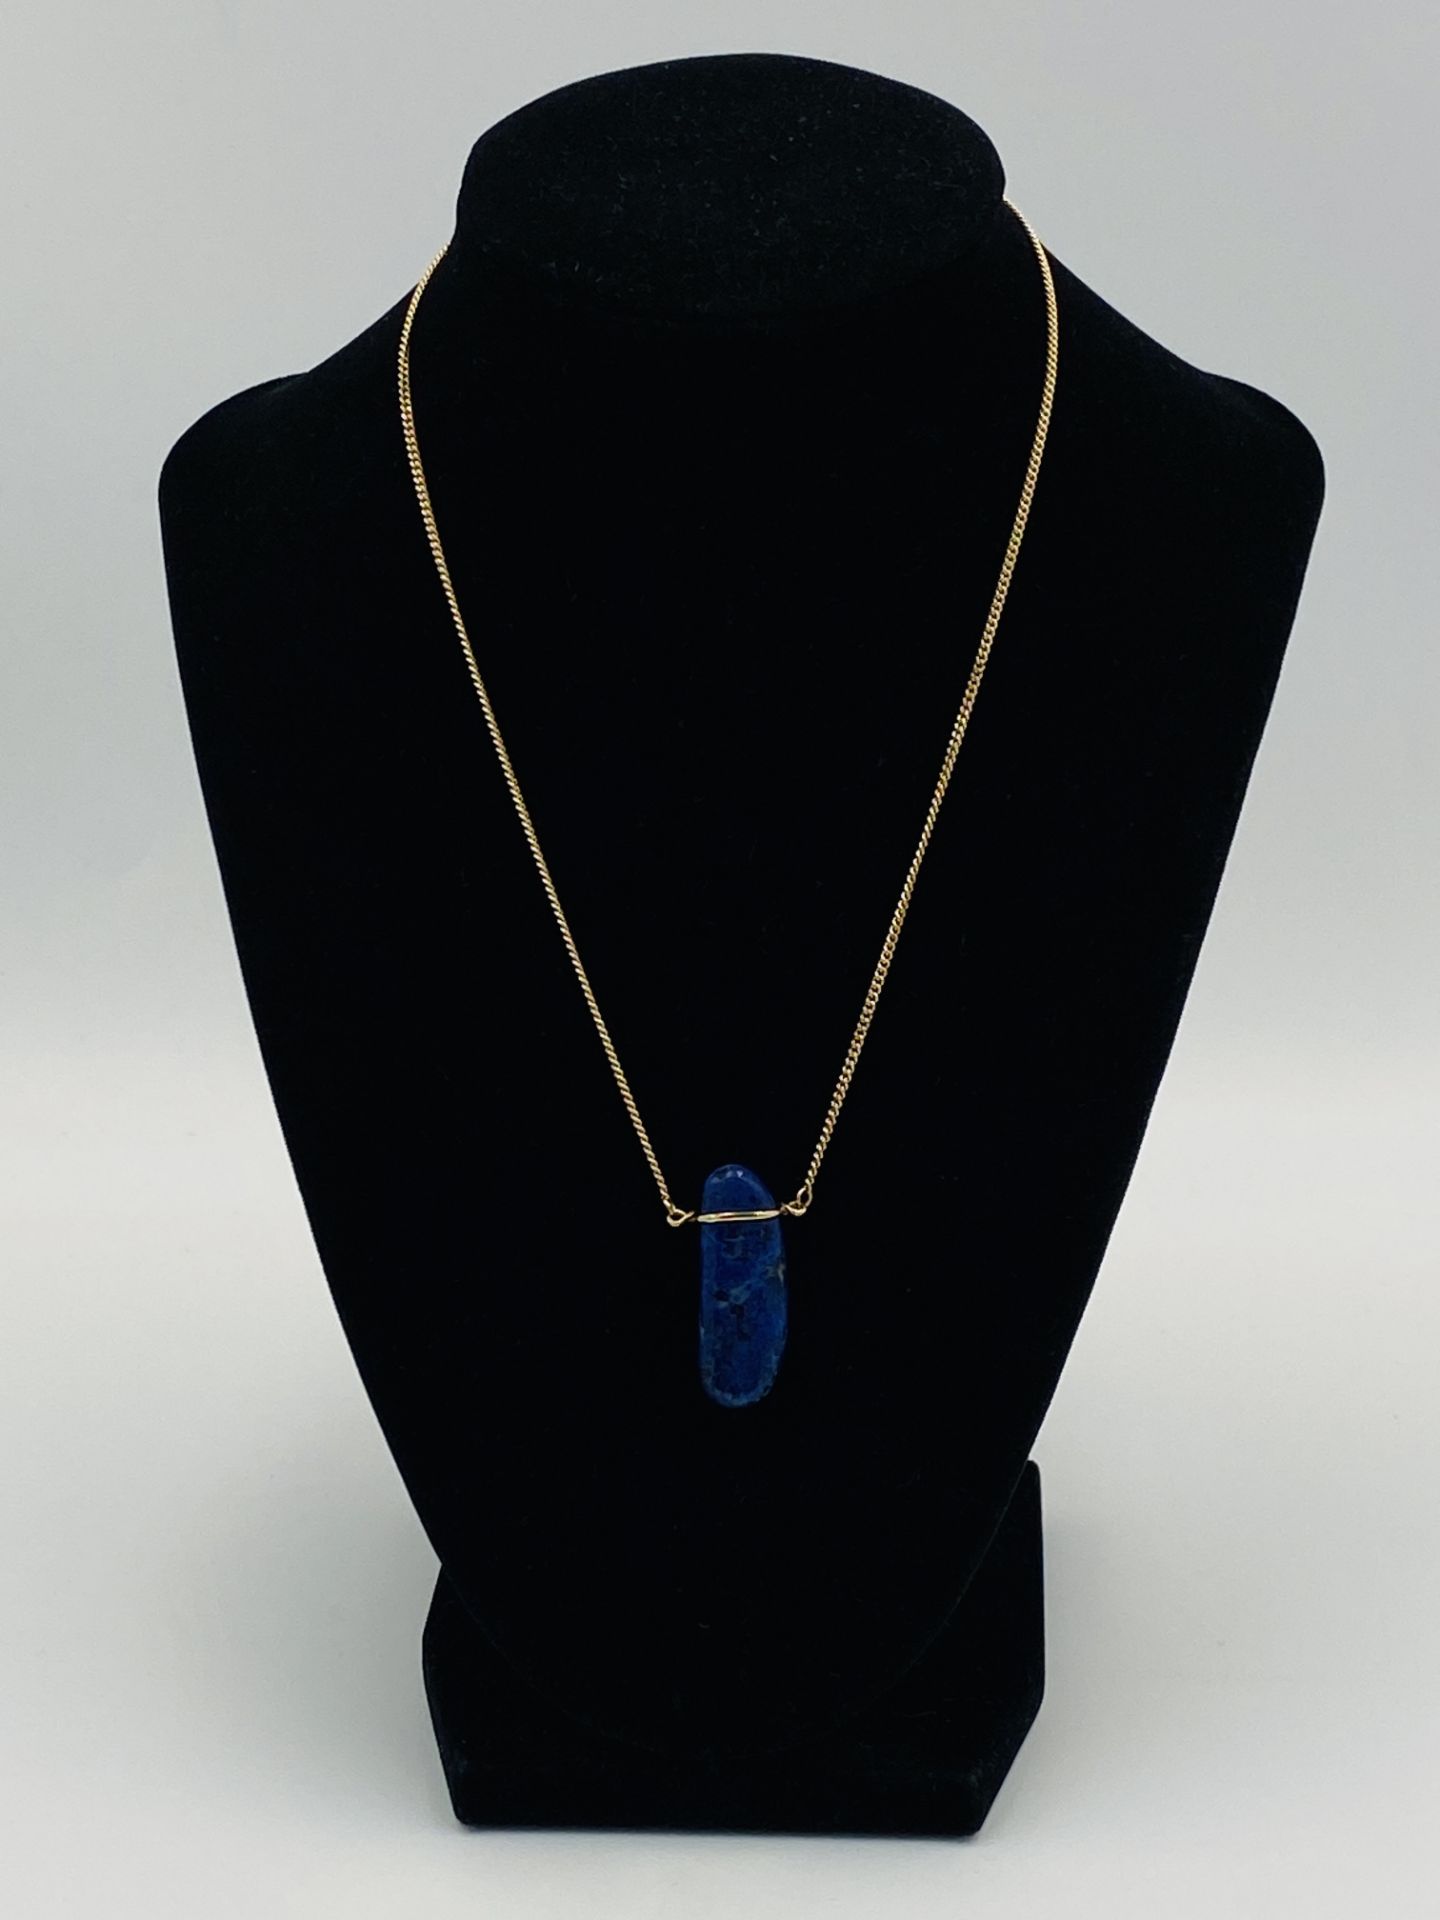 9ct gold necklace with a lapis pendant - Image 4 of 5